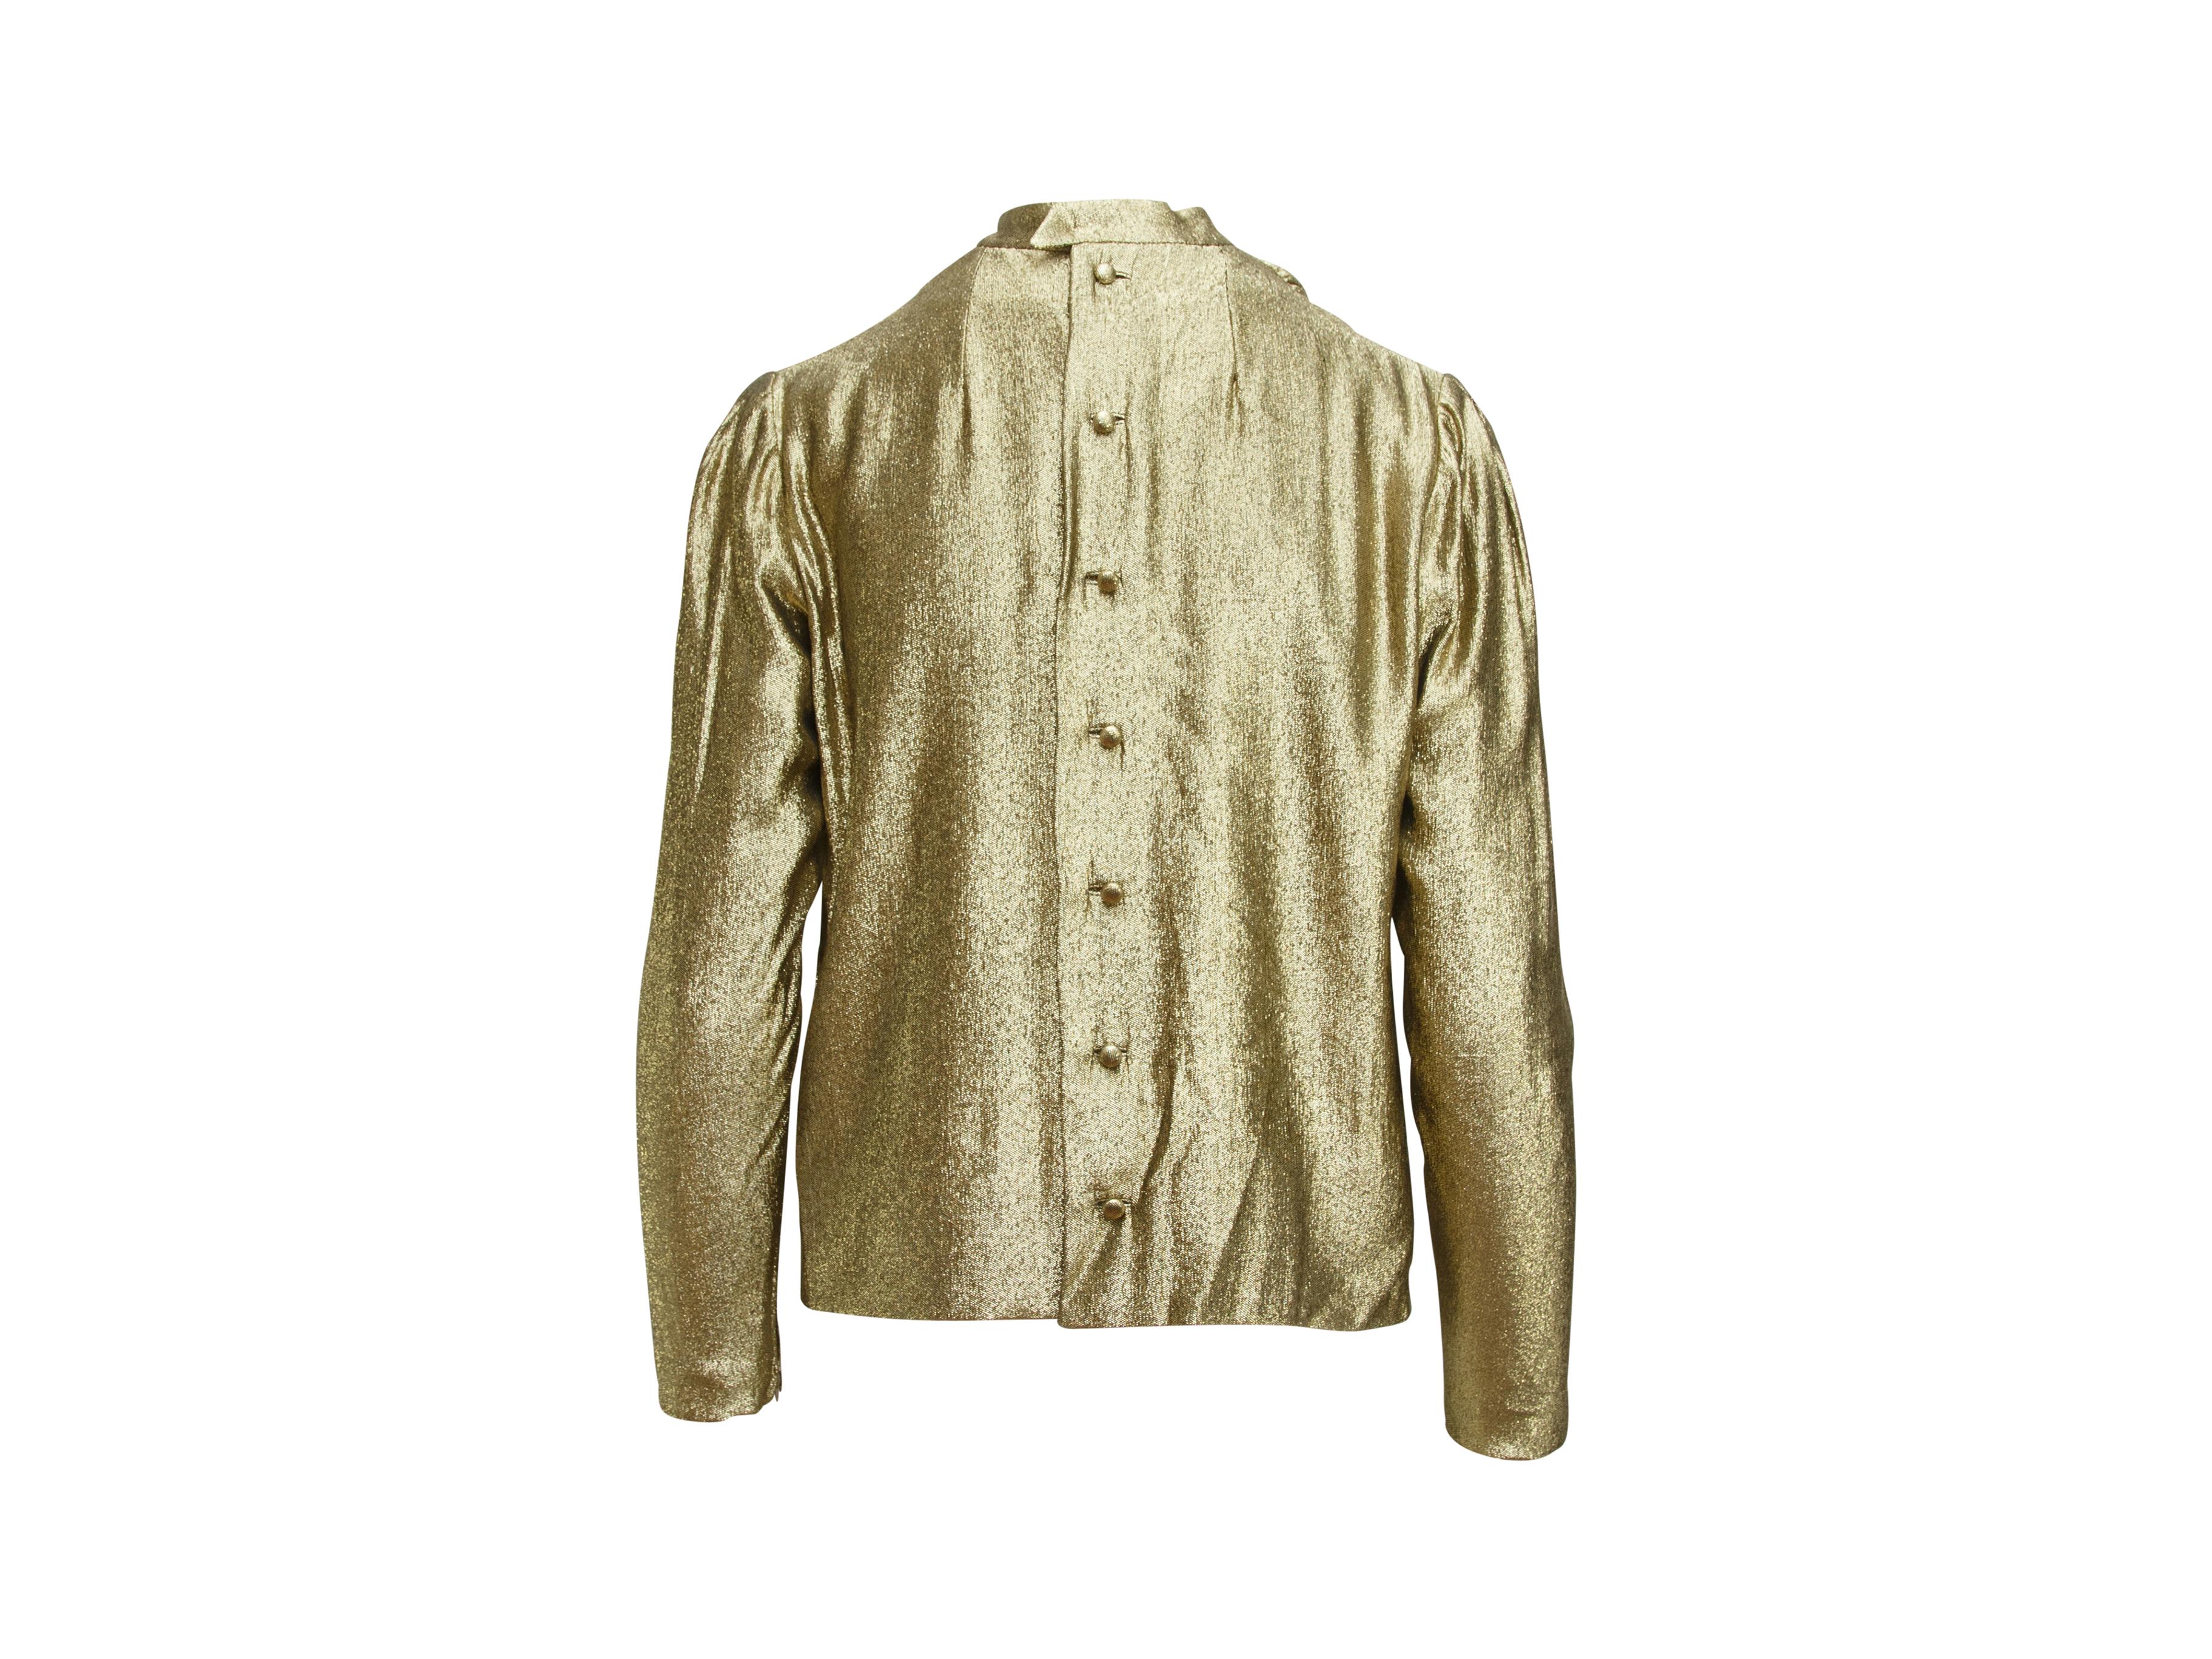 gold lame blouse